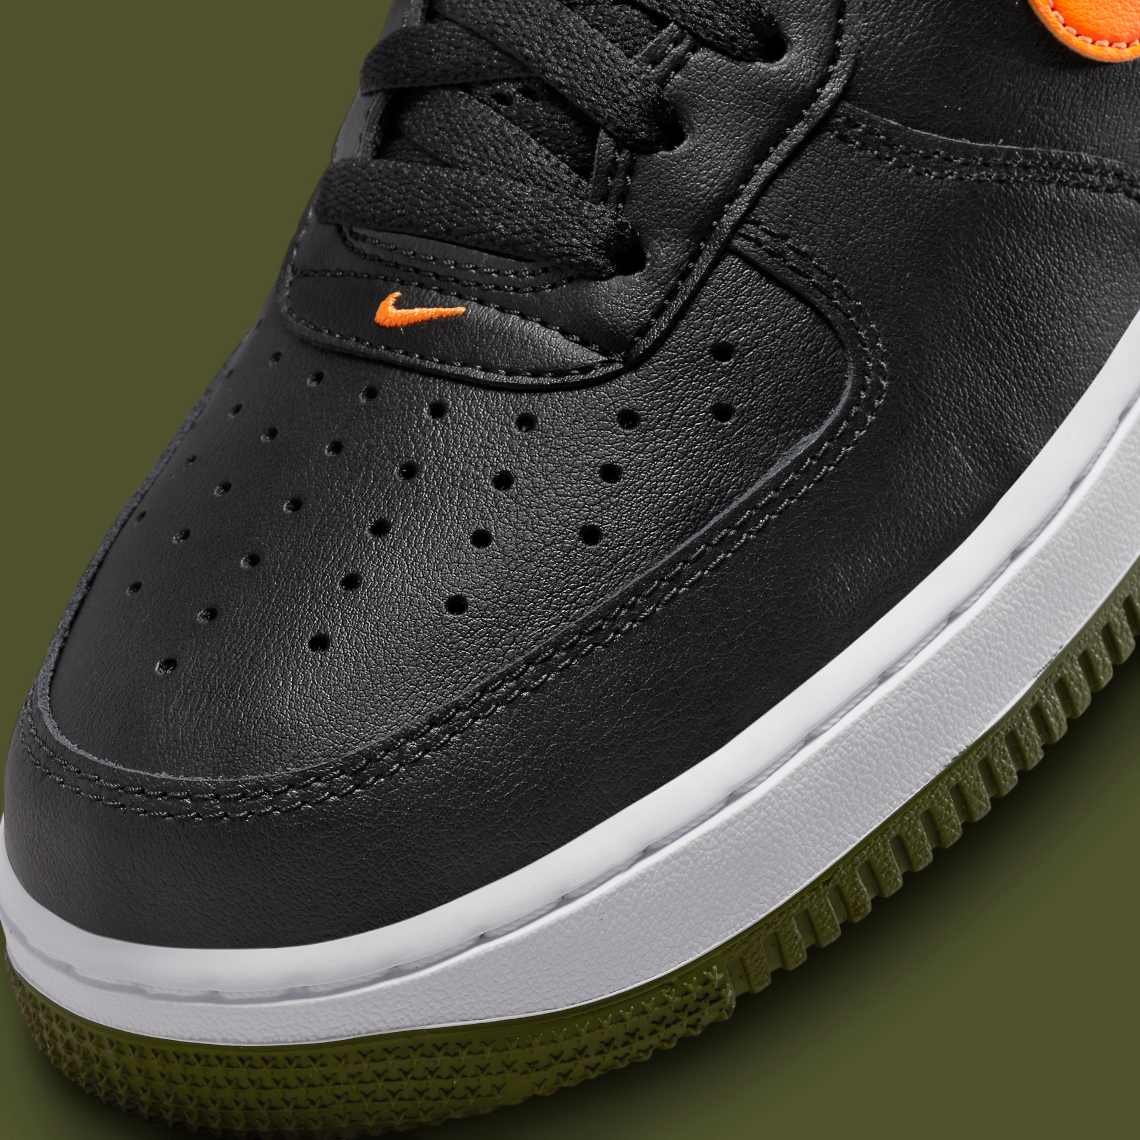 Nike Air Force 1 Low Hoops Pack Rough Green DH7440 001 2